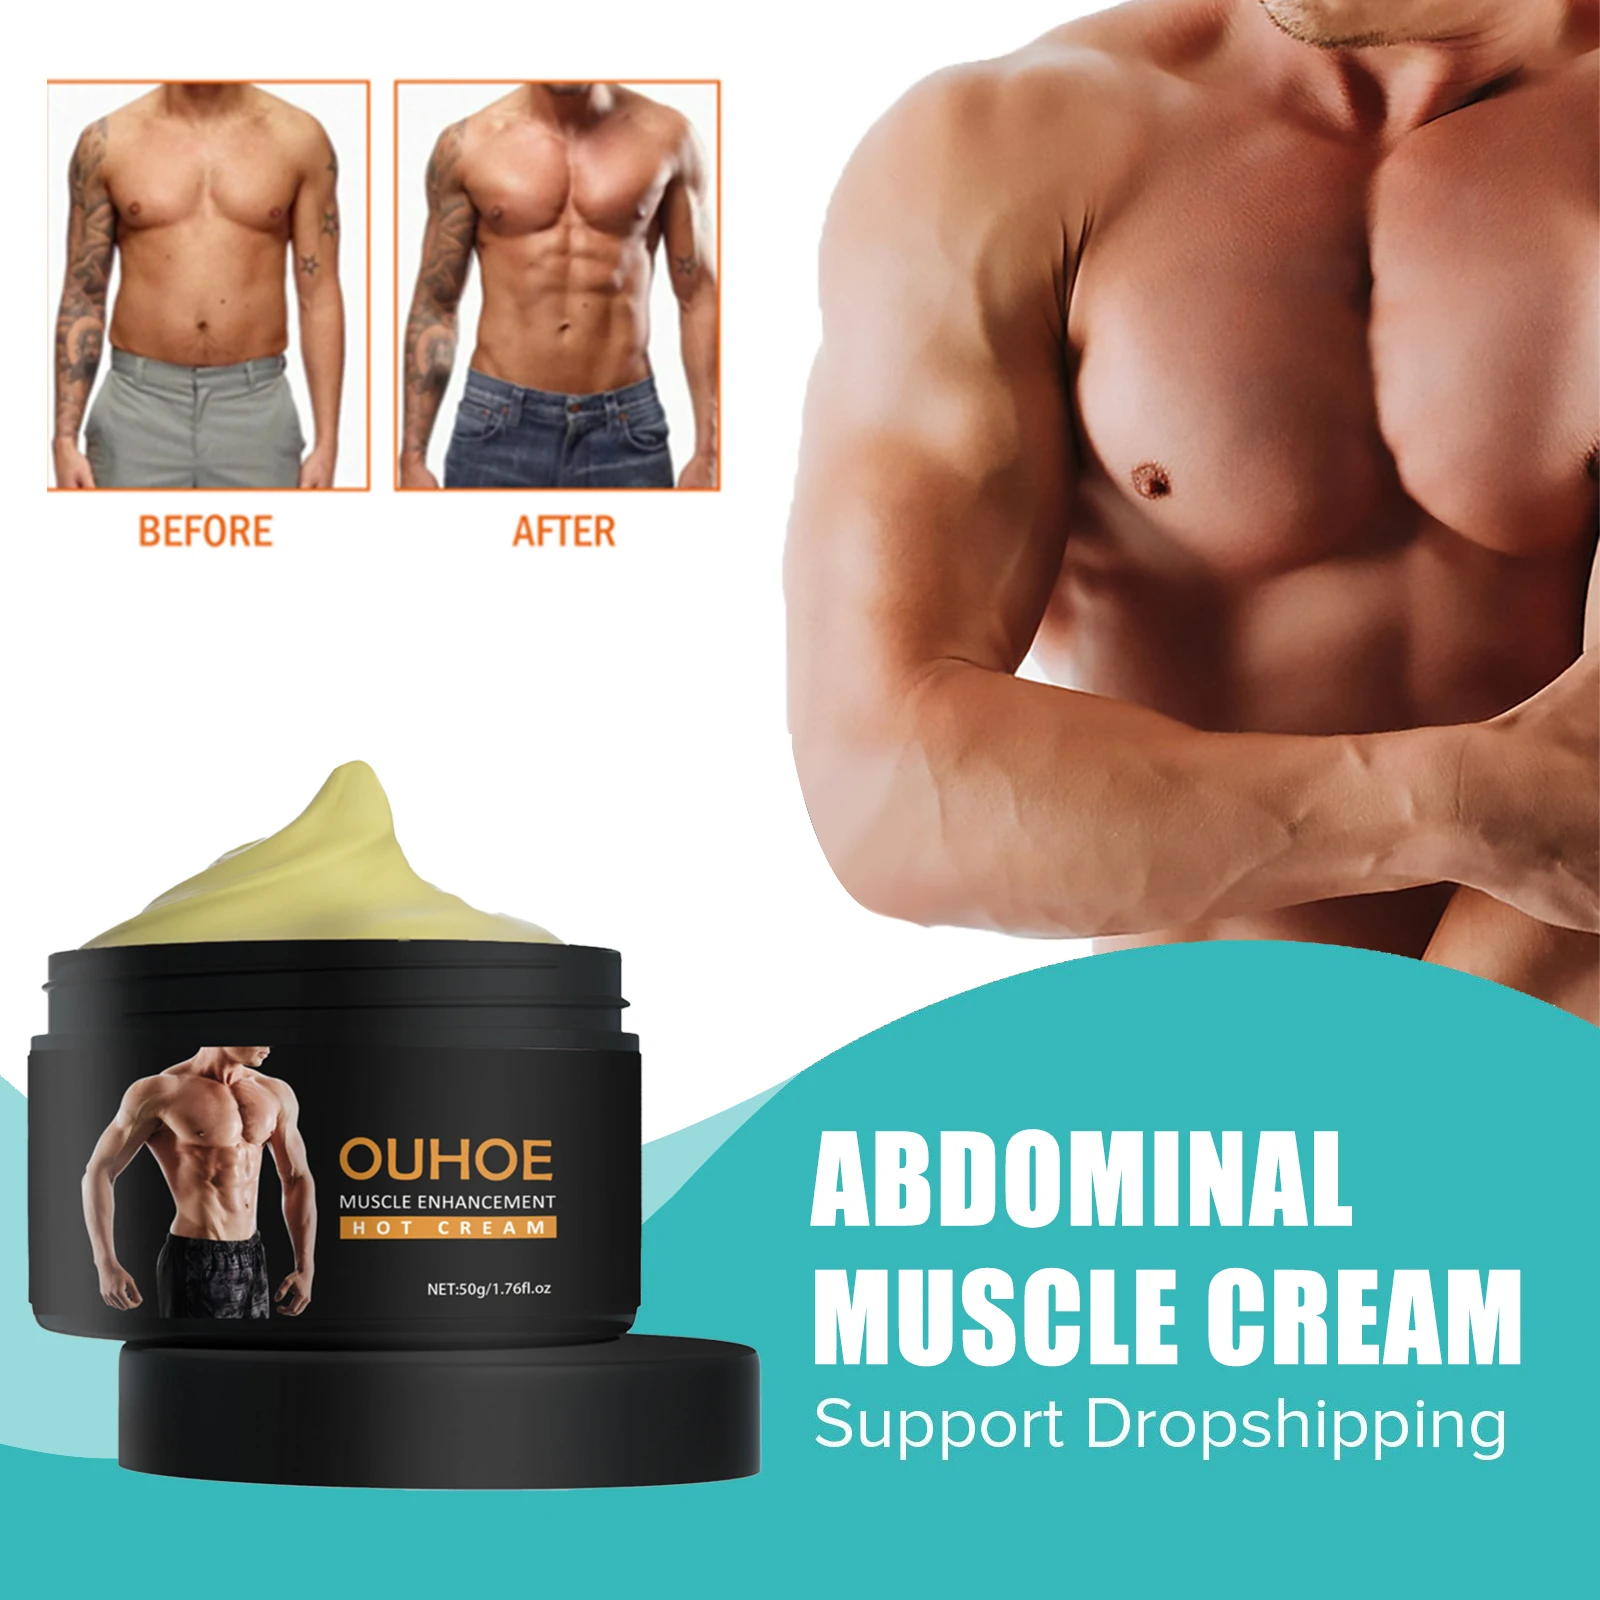 

Abdominal Muscle Cream Weight Loss Fat Burning Tightening Belly Increase Muscles Shaping Remove Cellulite Fast Slimming Cream